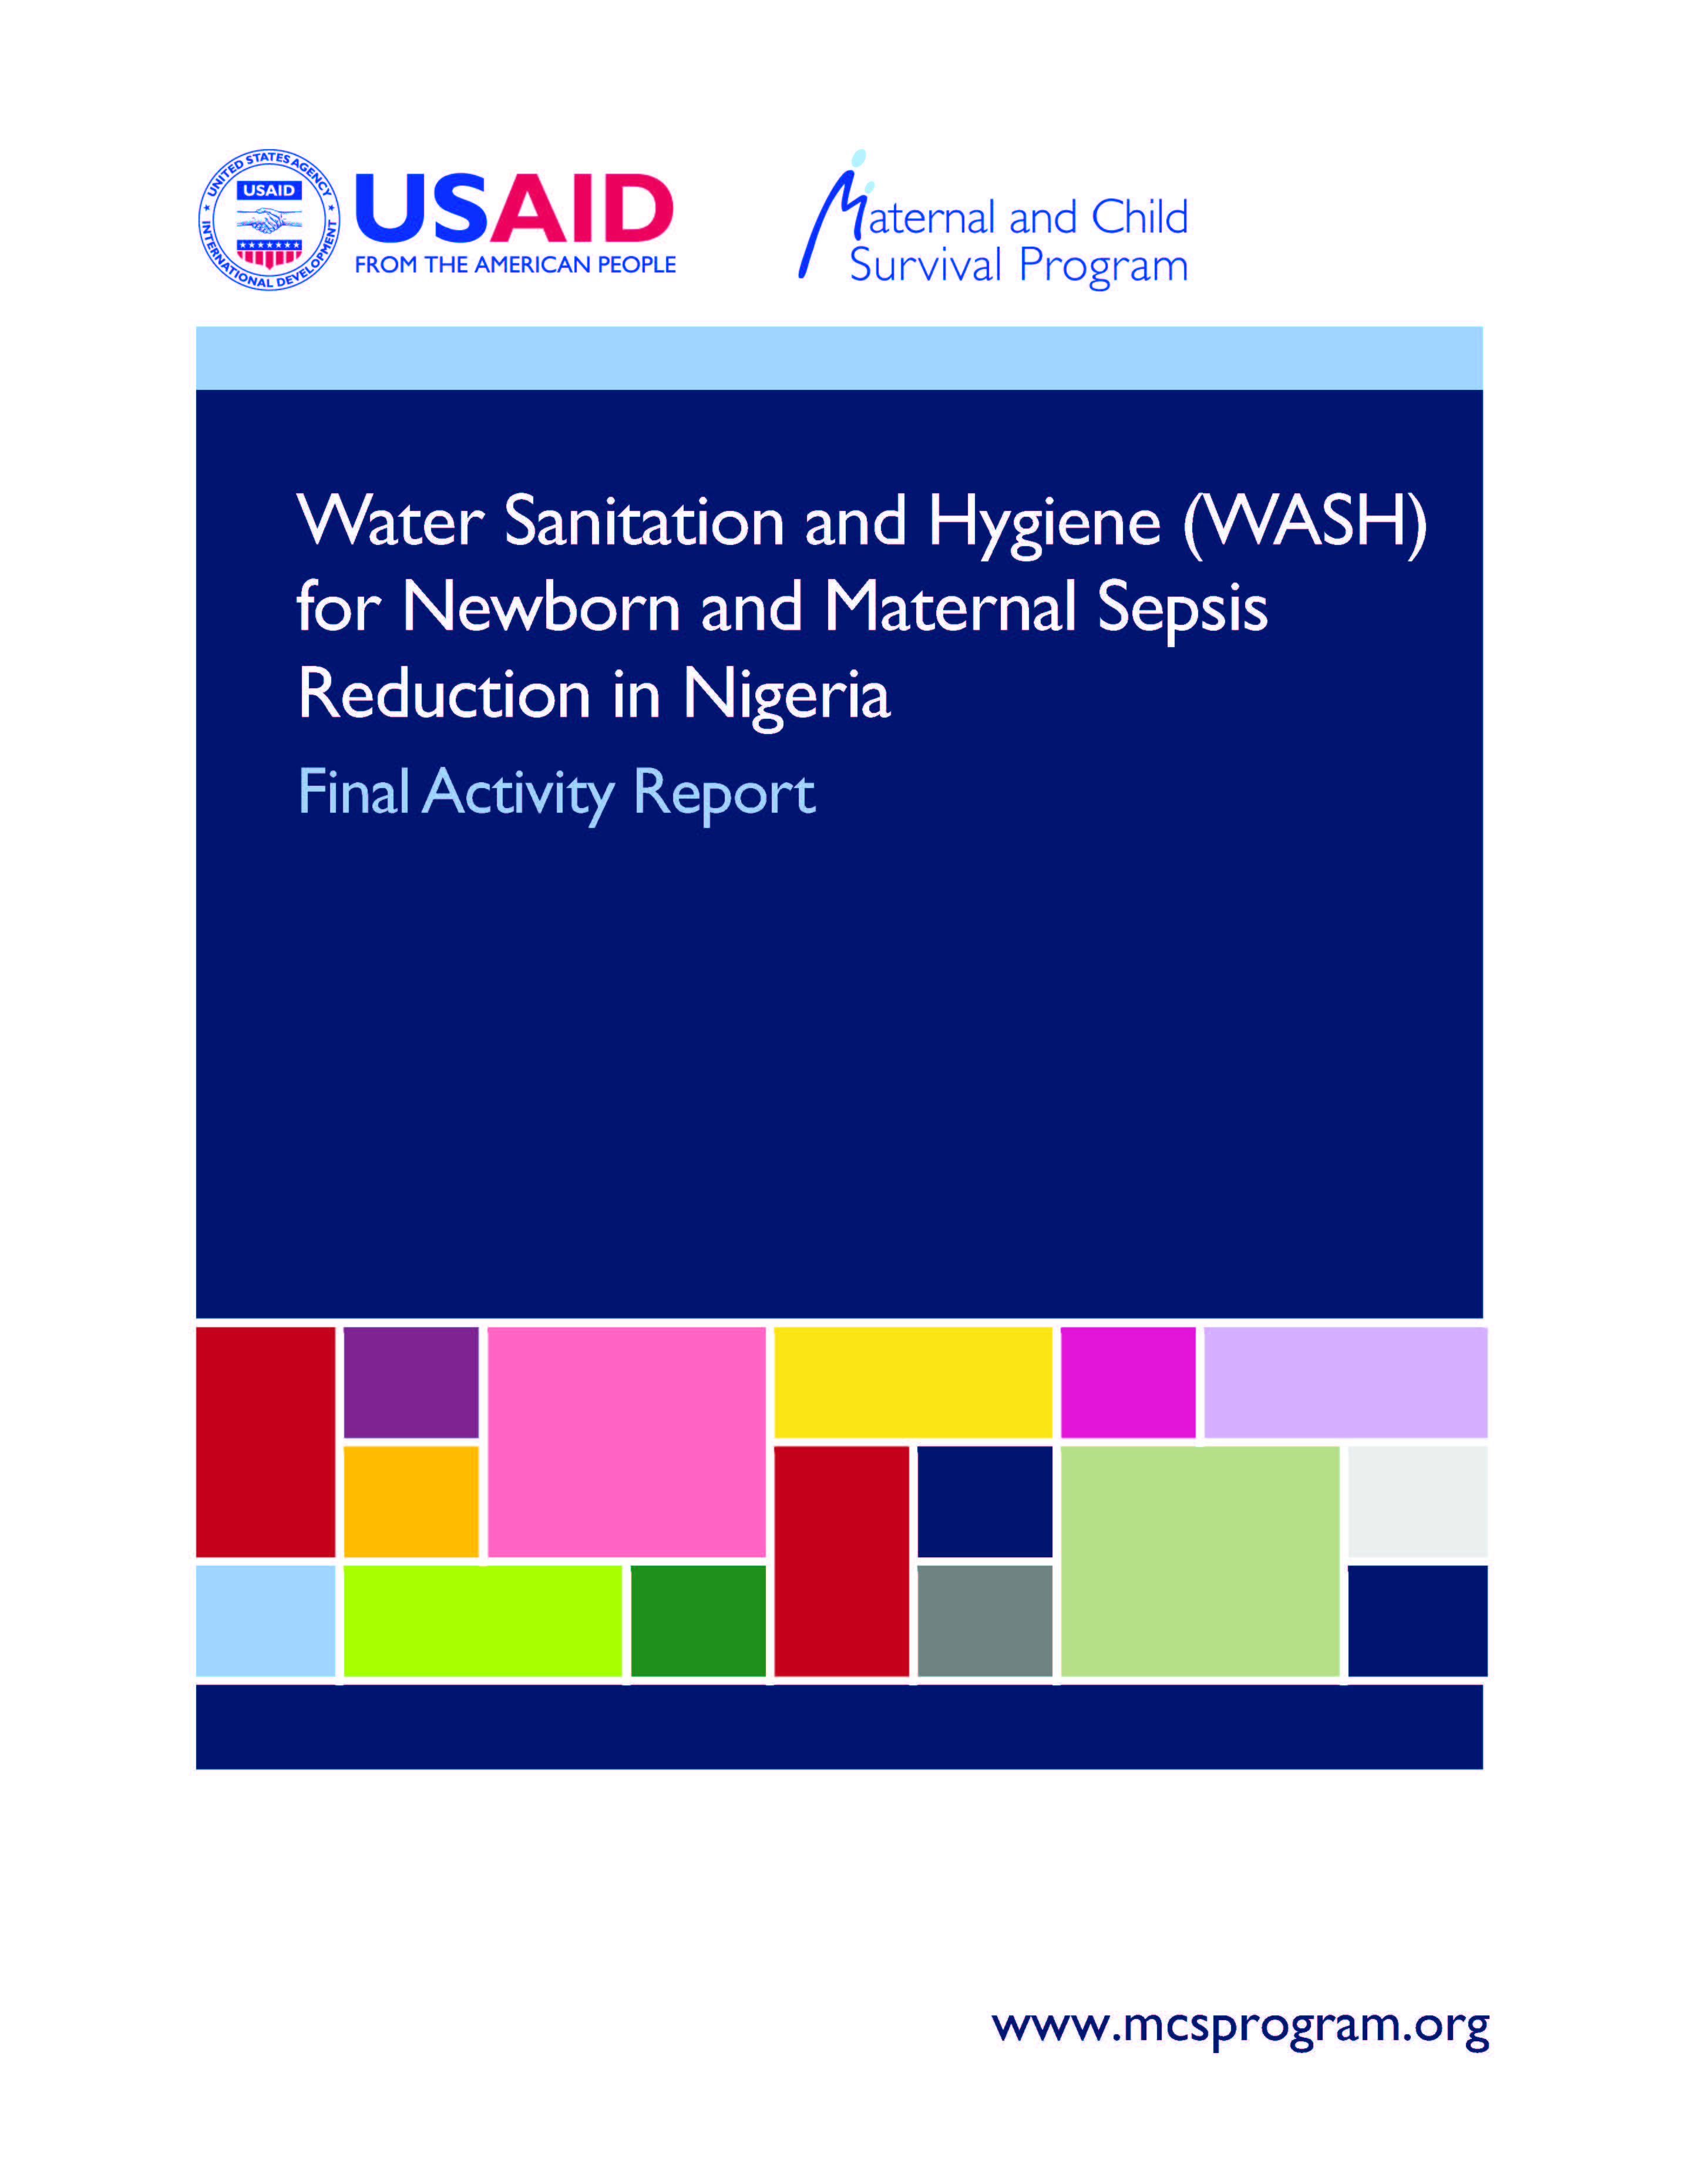 'WASH for Newborn and Maternal Sepsis Reduction in Nigeria' cover